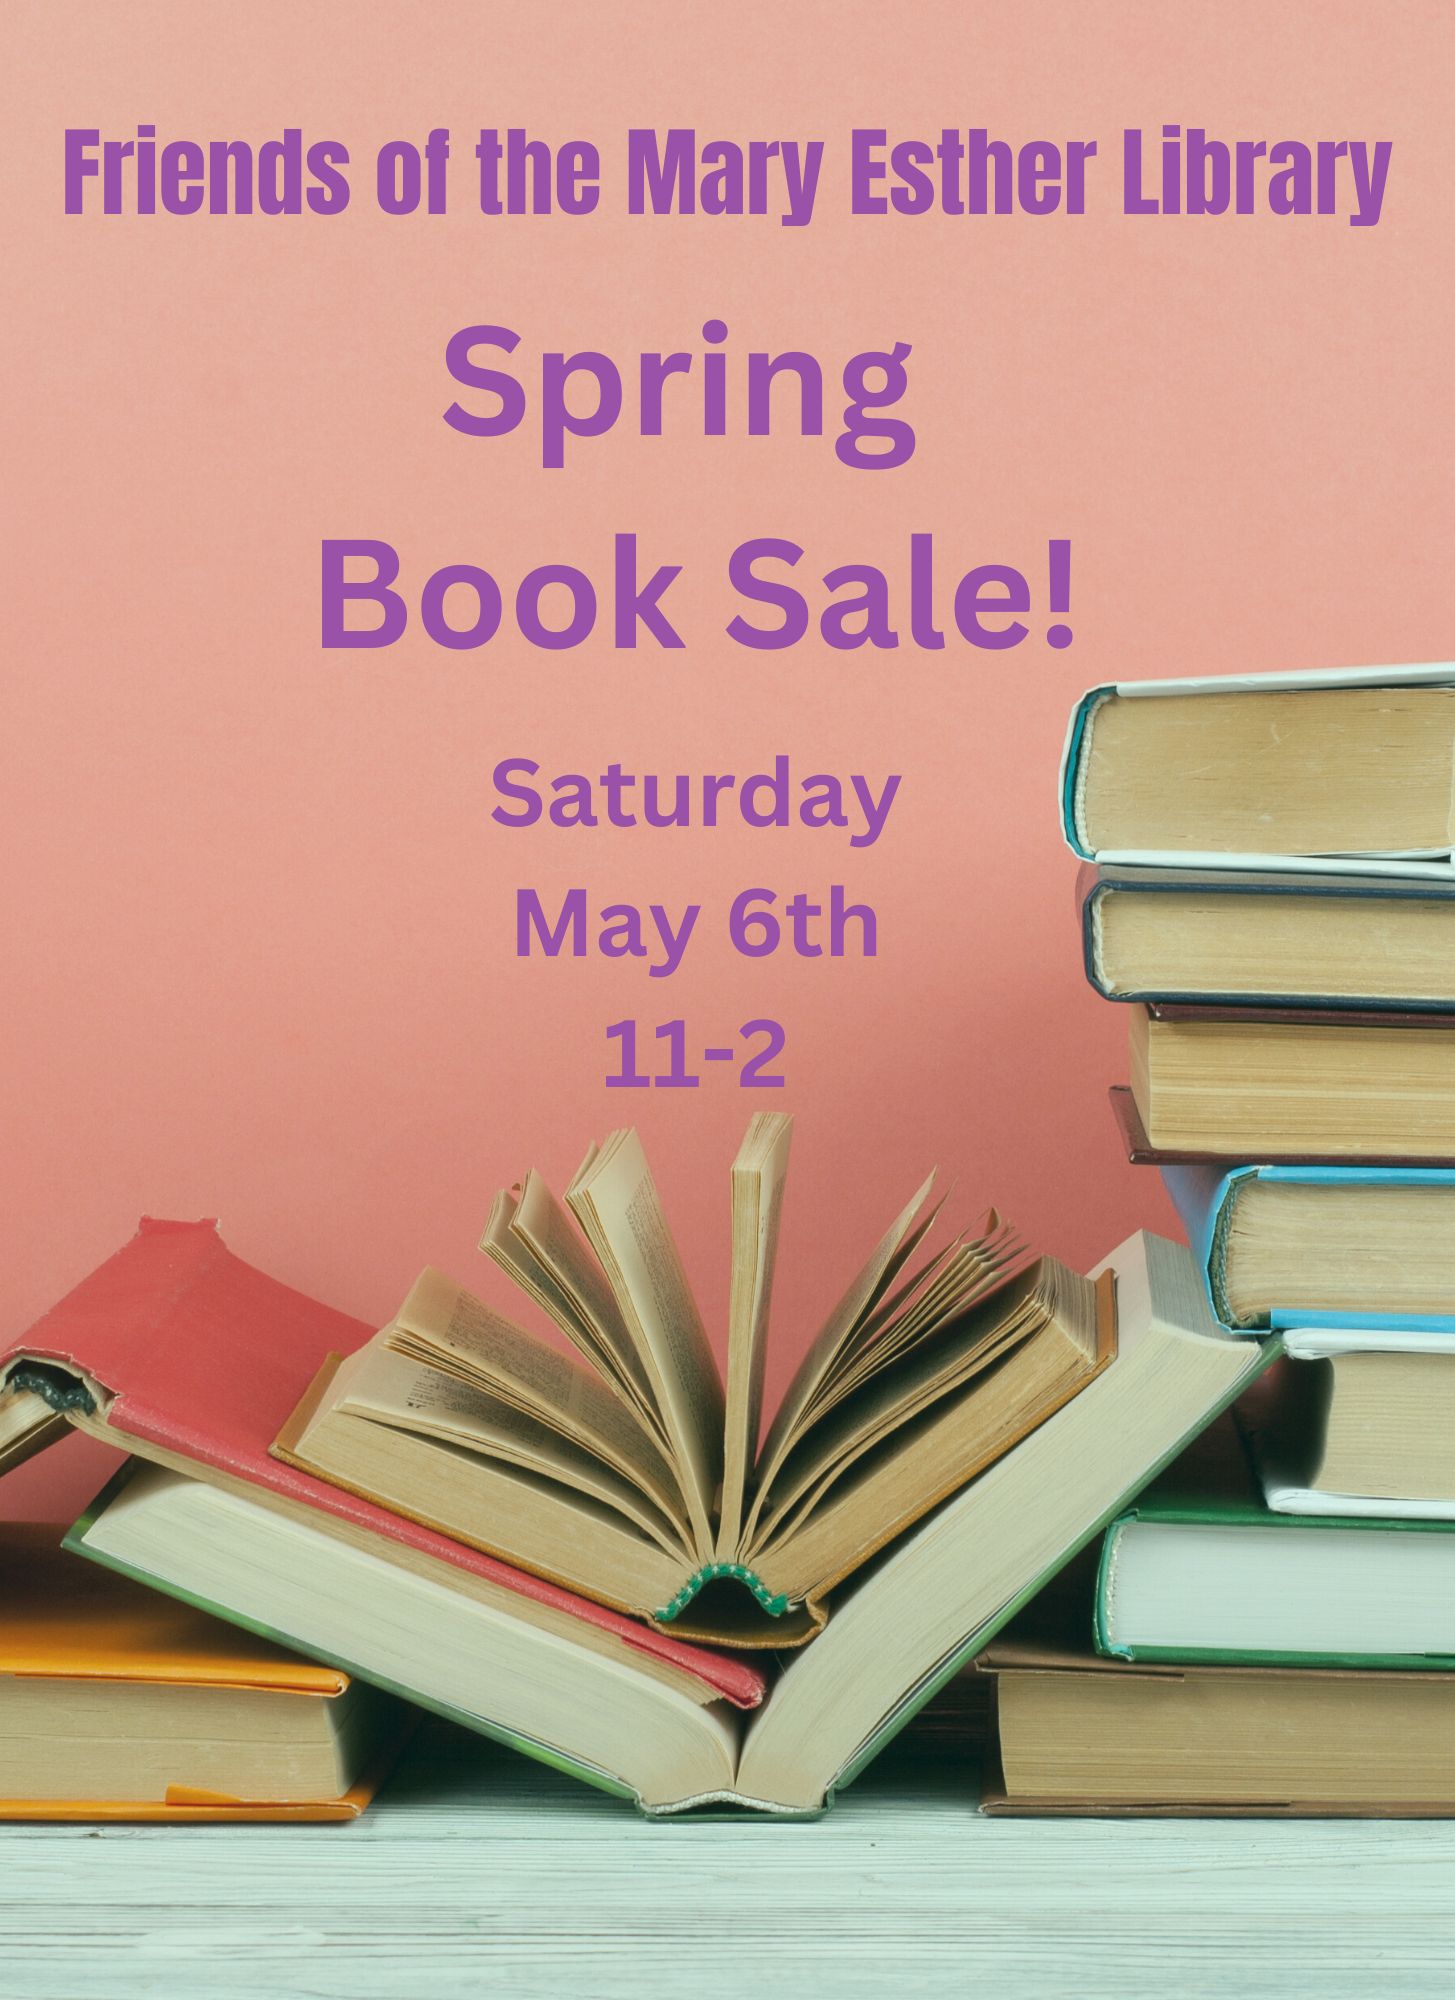 Friends of the Mary Esther Library Spring Book Sale. Pink background with book stacks. Saturday, May 6th from 11am-2pm